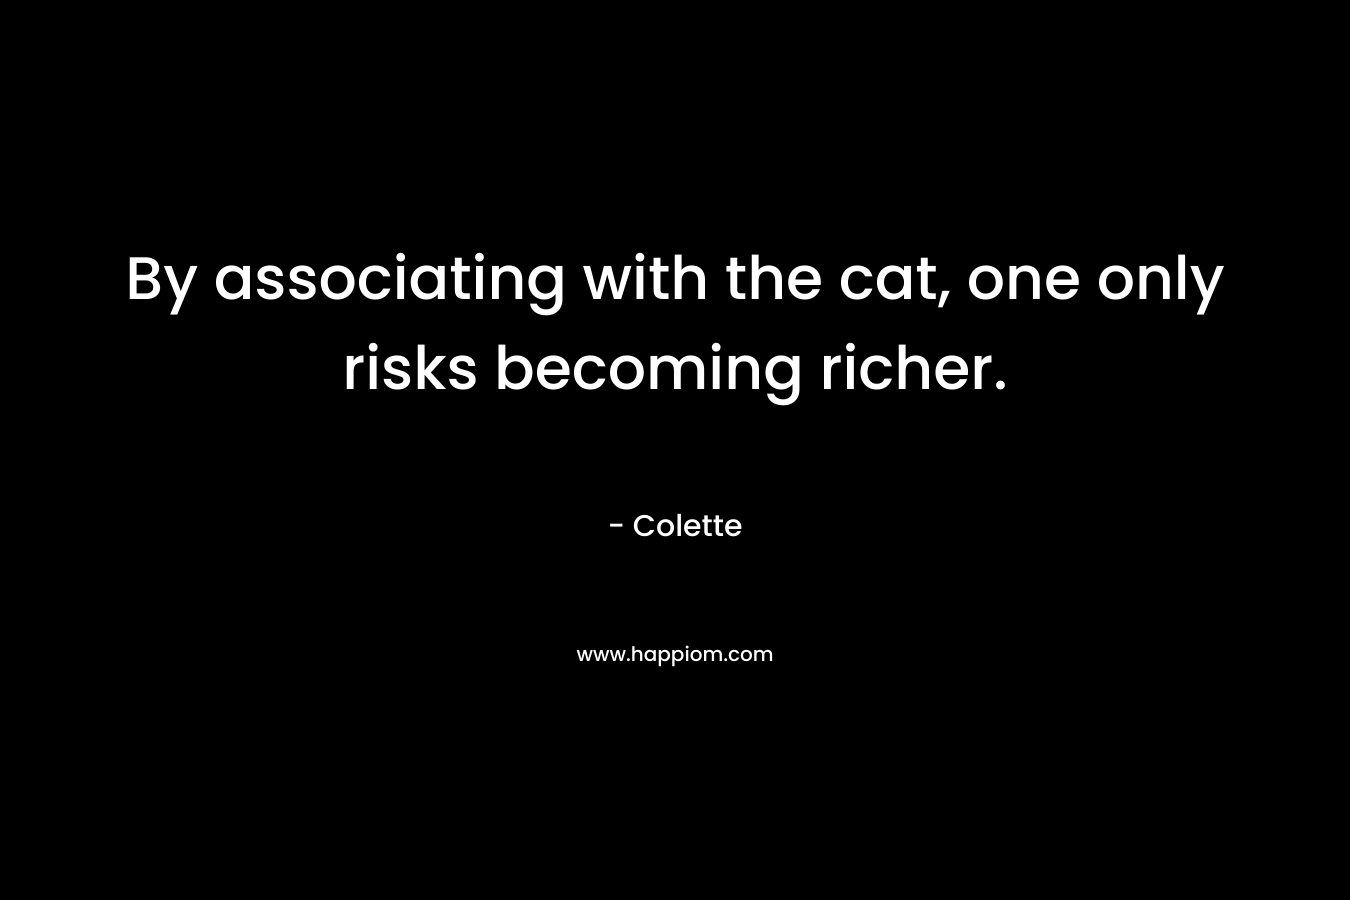 By associating with the cat, one only risks becoming richer. – Colette